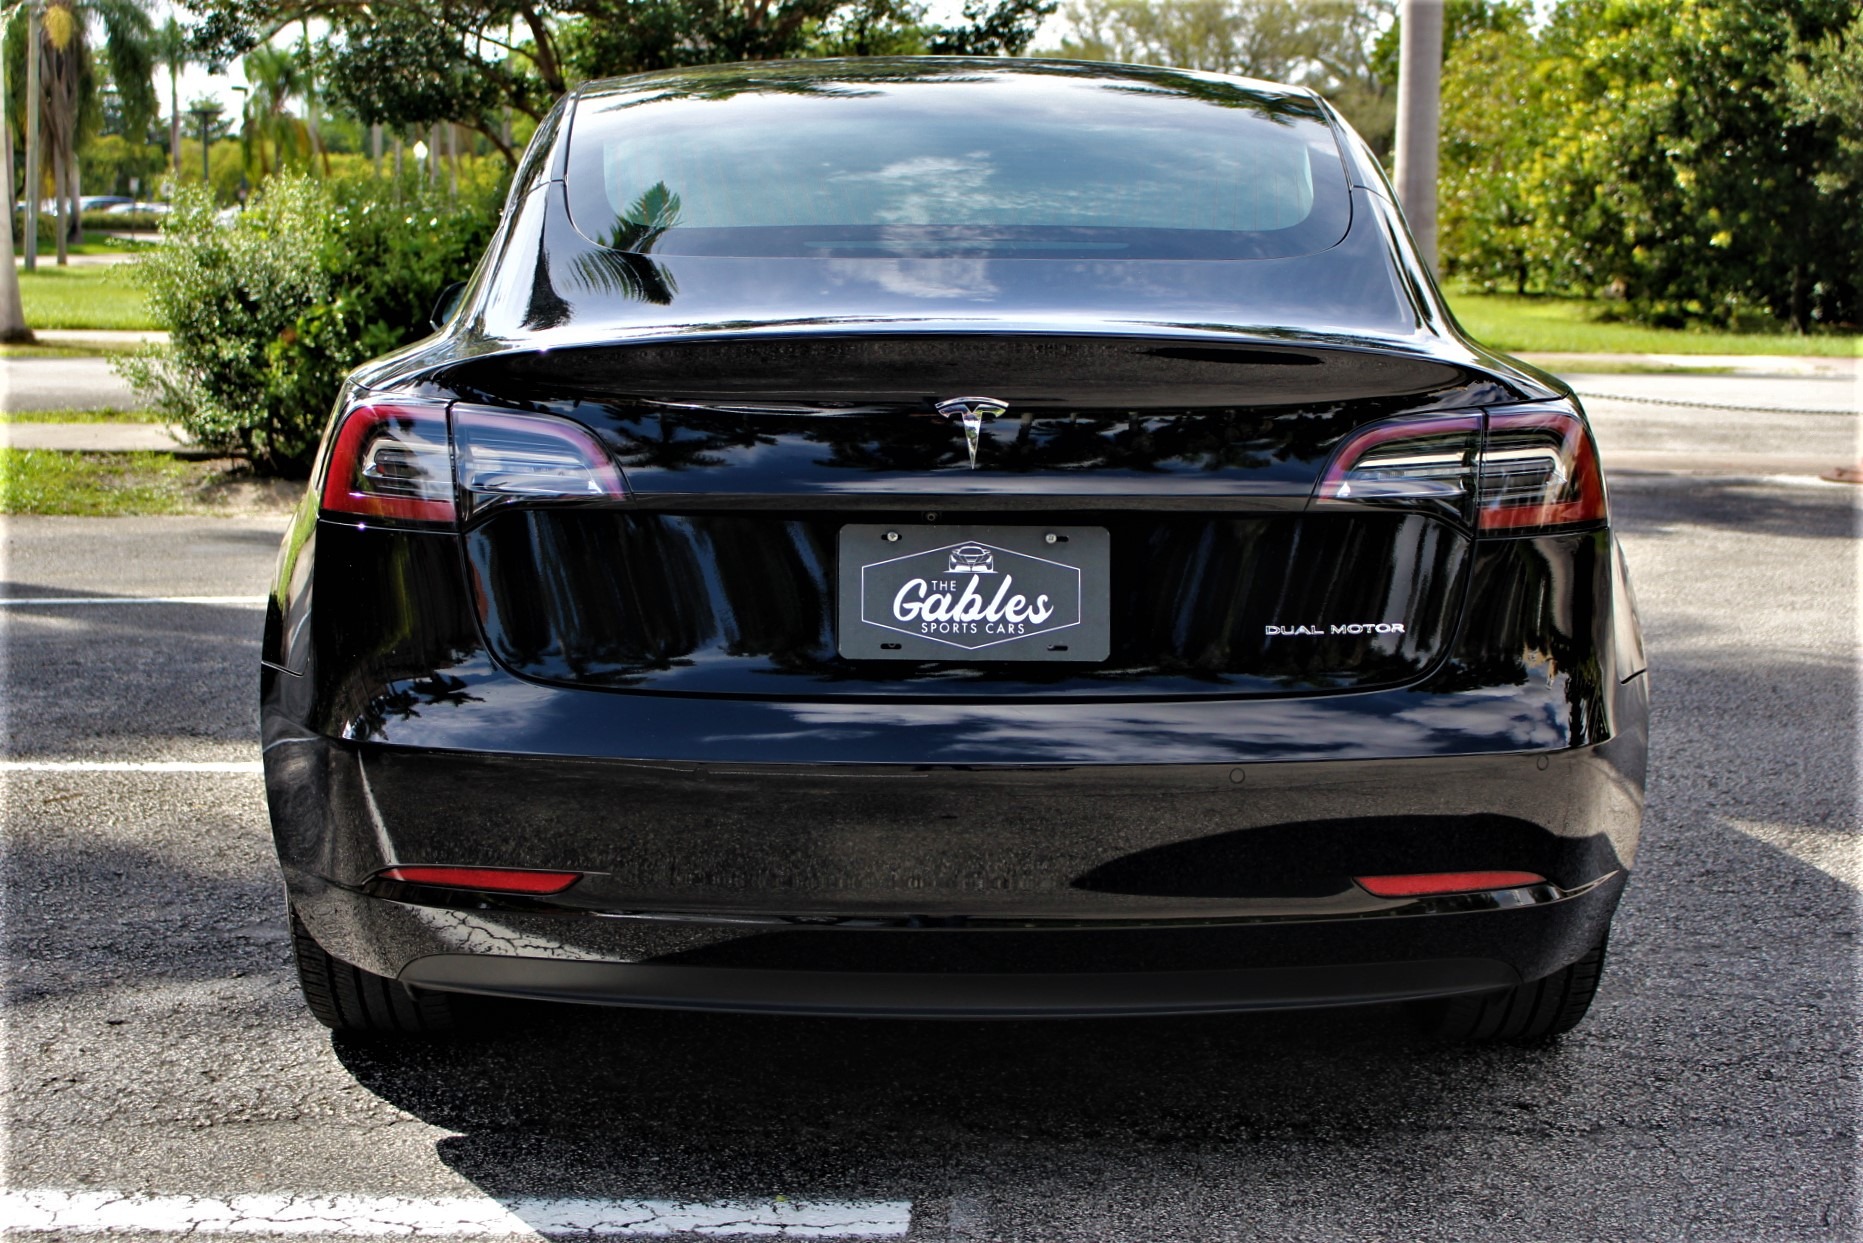 Used 2019 Tesla Model 3 Performance for sale Sold at The Gables Sports Cars in Miami FL 33146 2